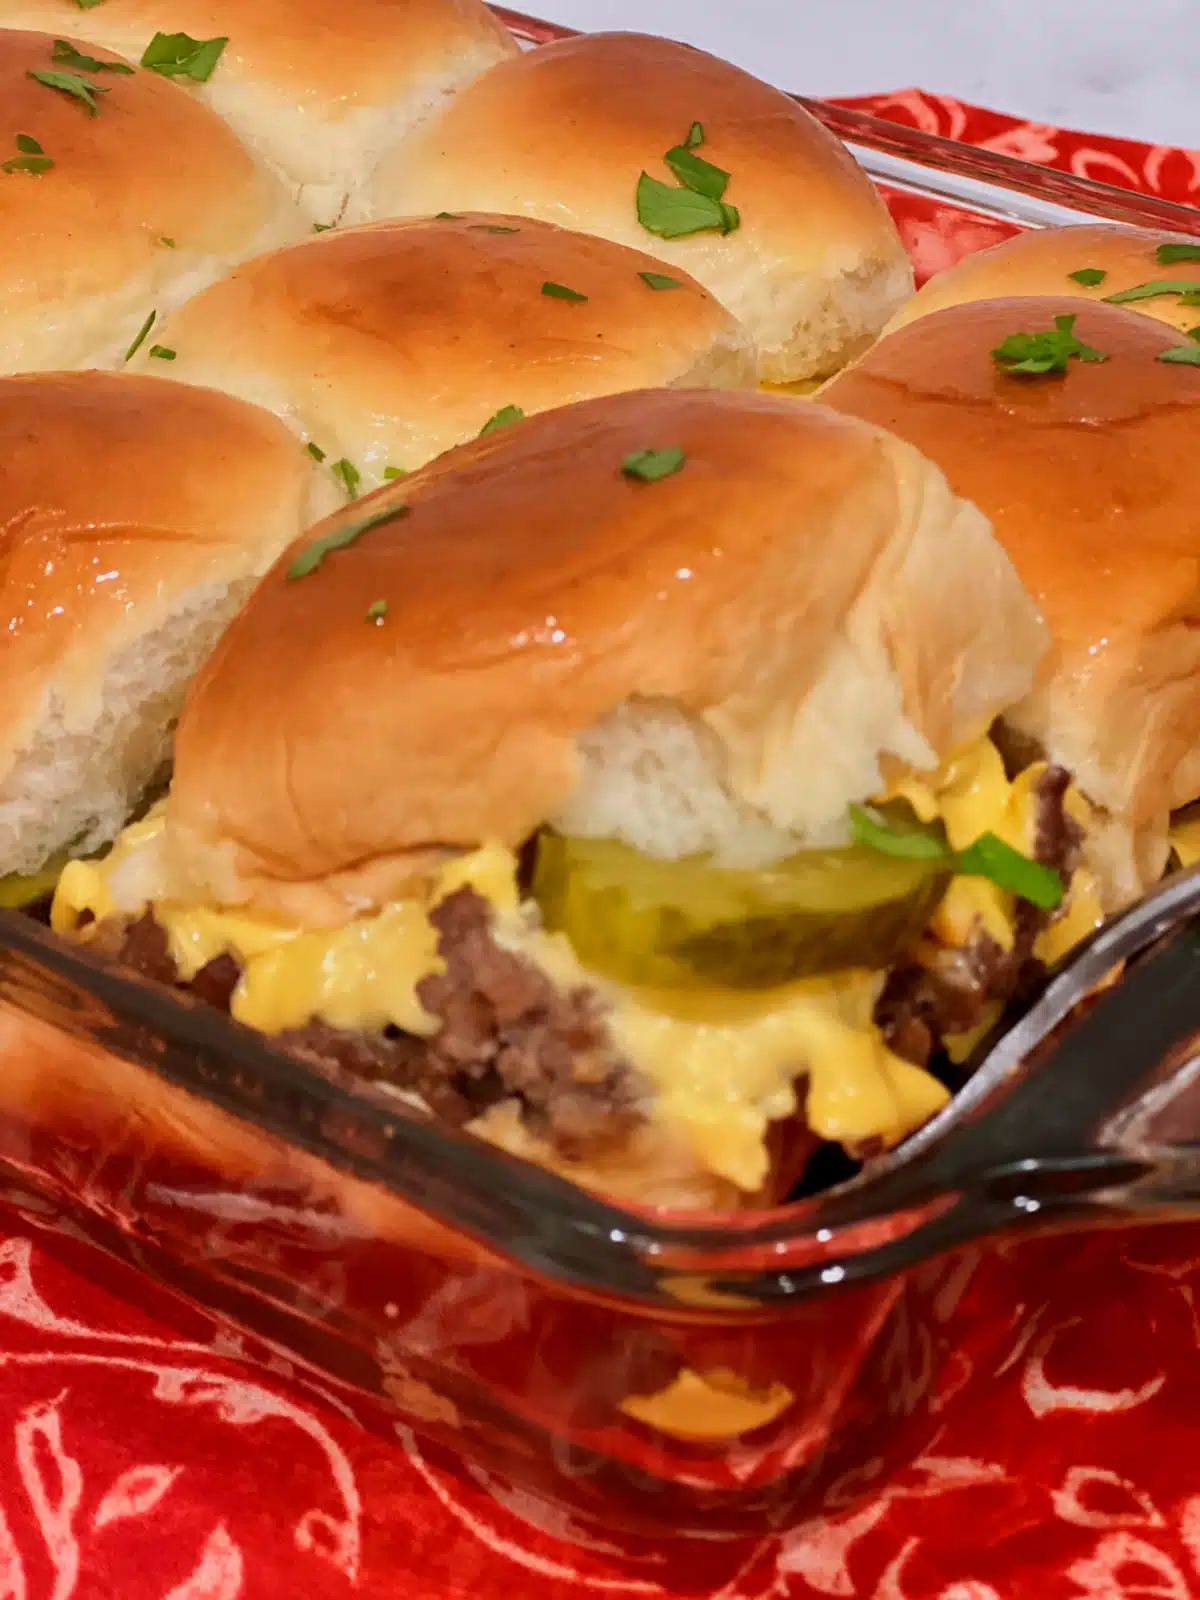 white castle casserole with ground beef, cheese and pickles